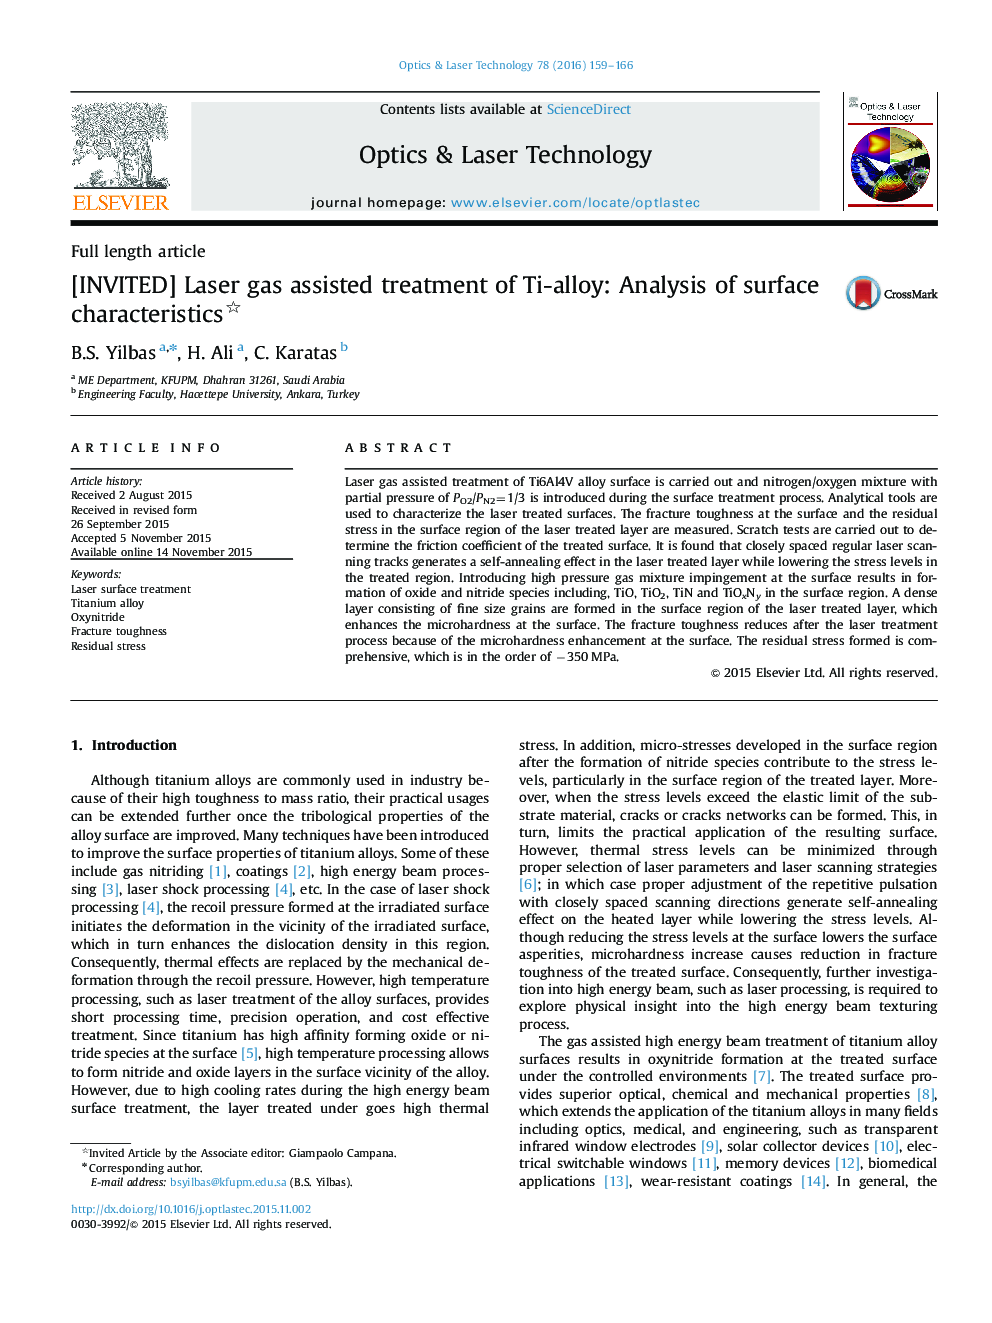 [INVITED] Laser gas assisted treatment of Ti-alloy: Analysis of surface characteristics